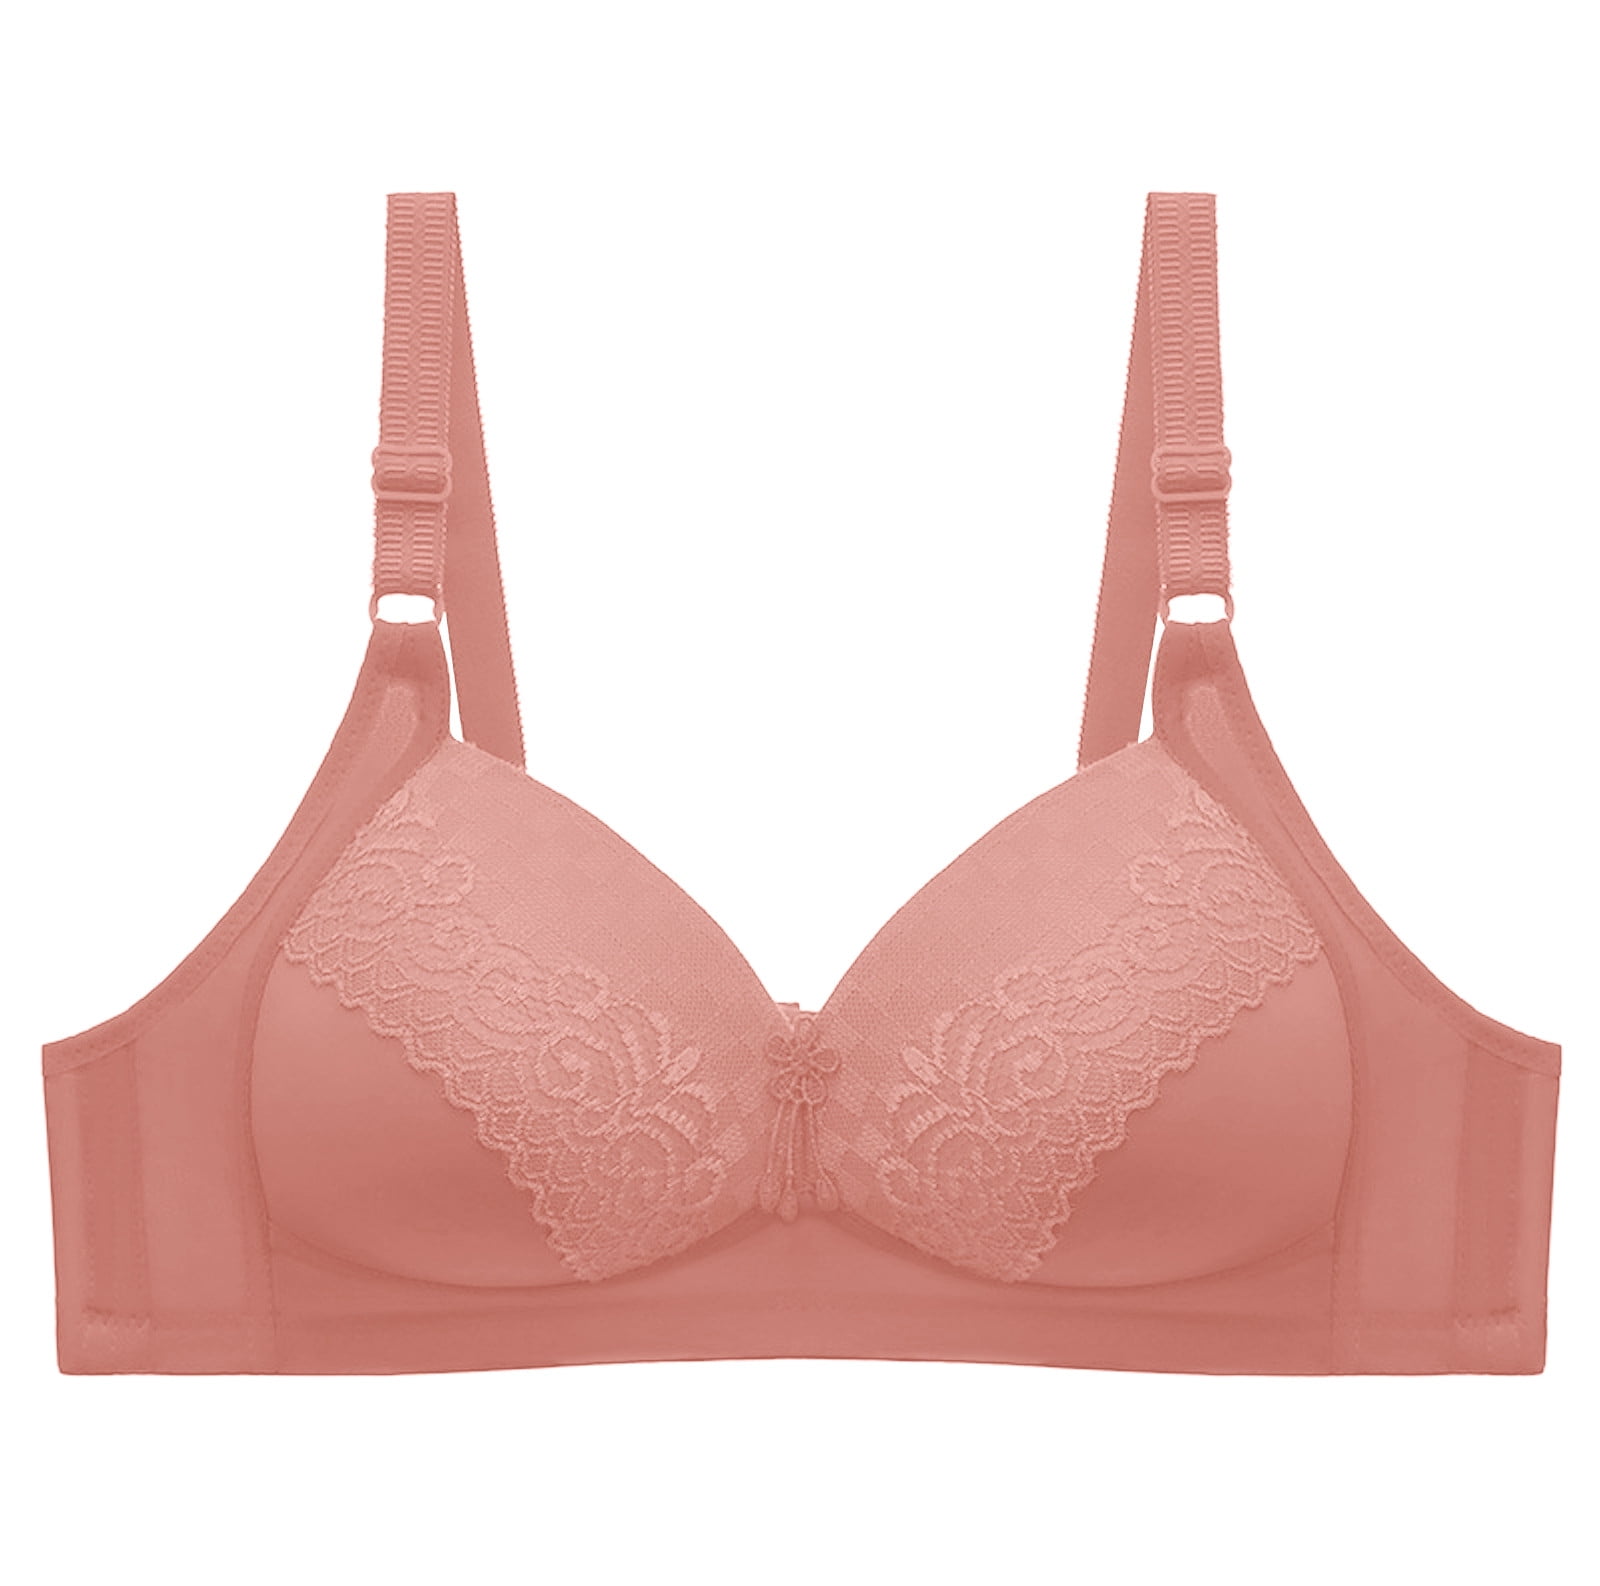 Alluring Peach Cotton Non-Padded Bras For Women at Rs 313.00